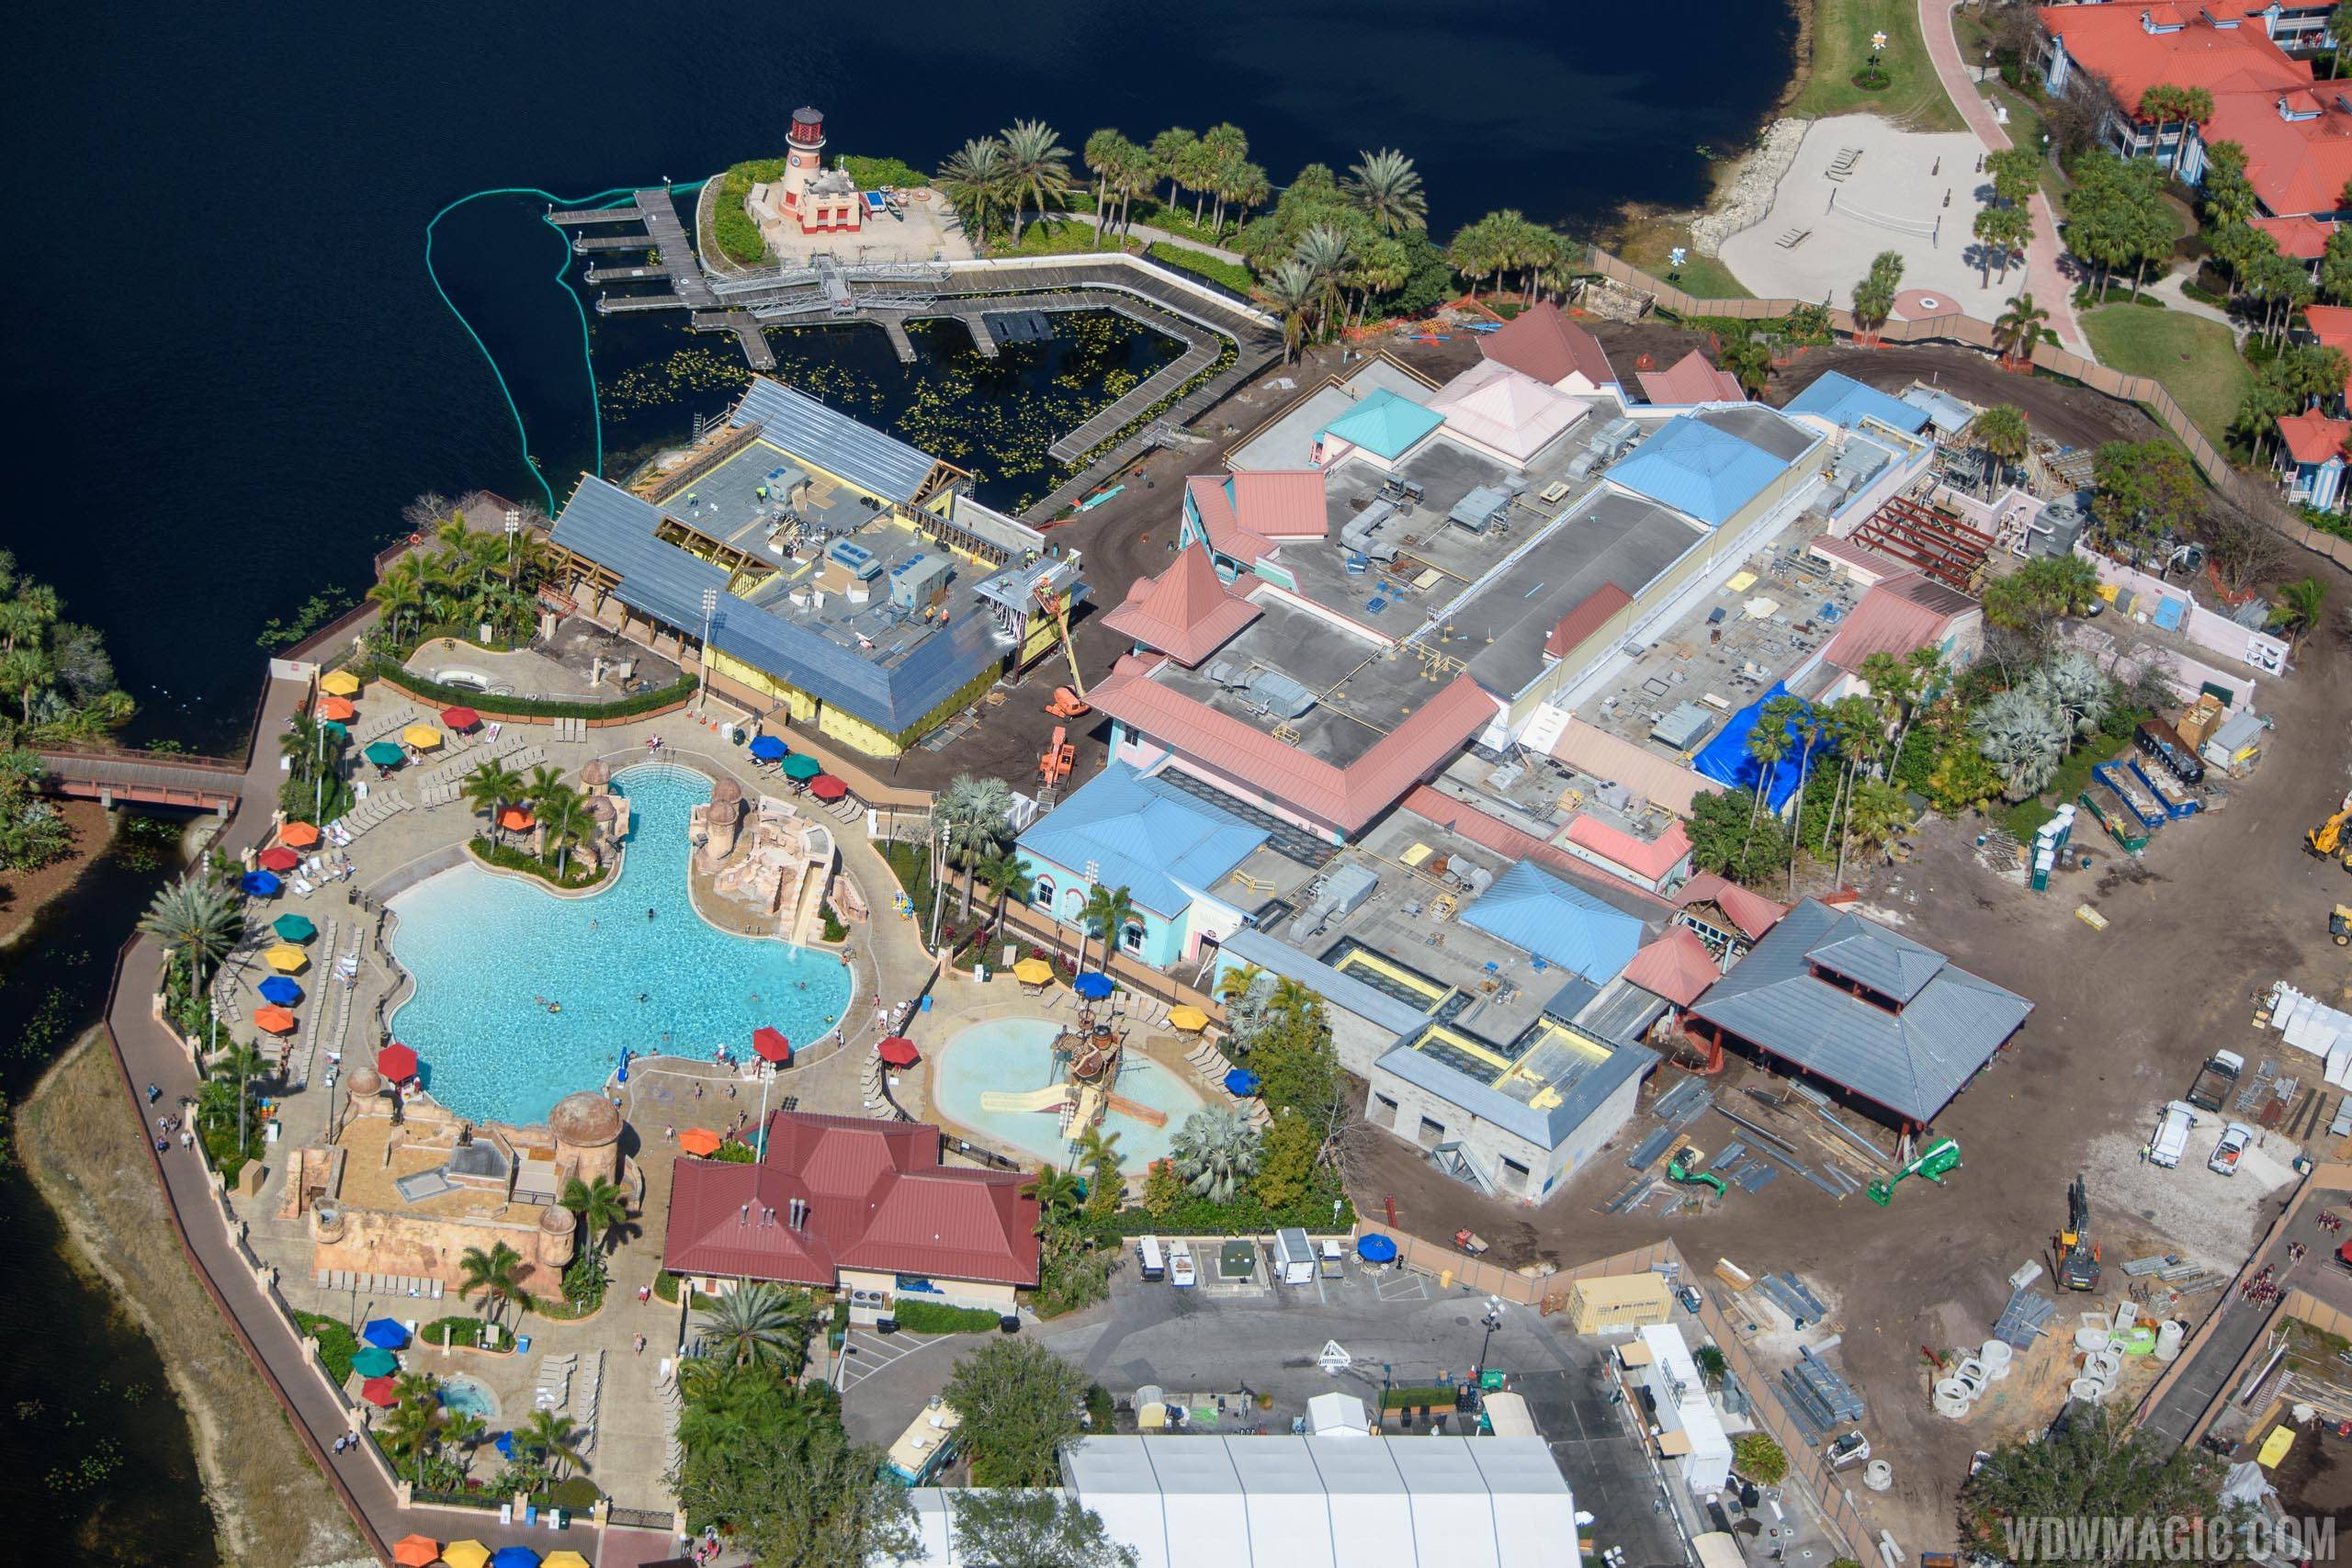 PHOTOS - Latest look at the changes coming to Disney's Caribbean Beach Resort